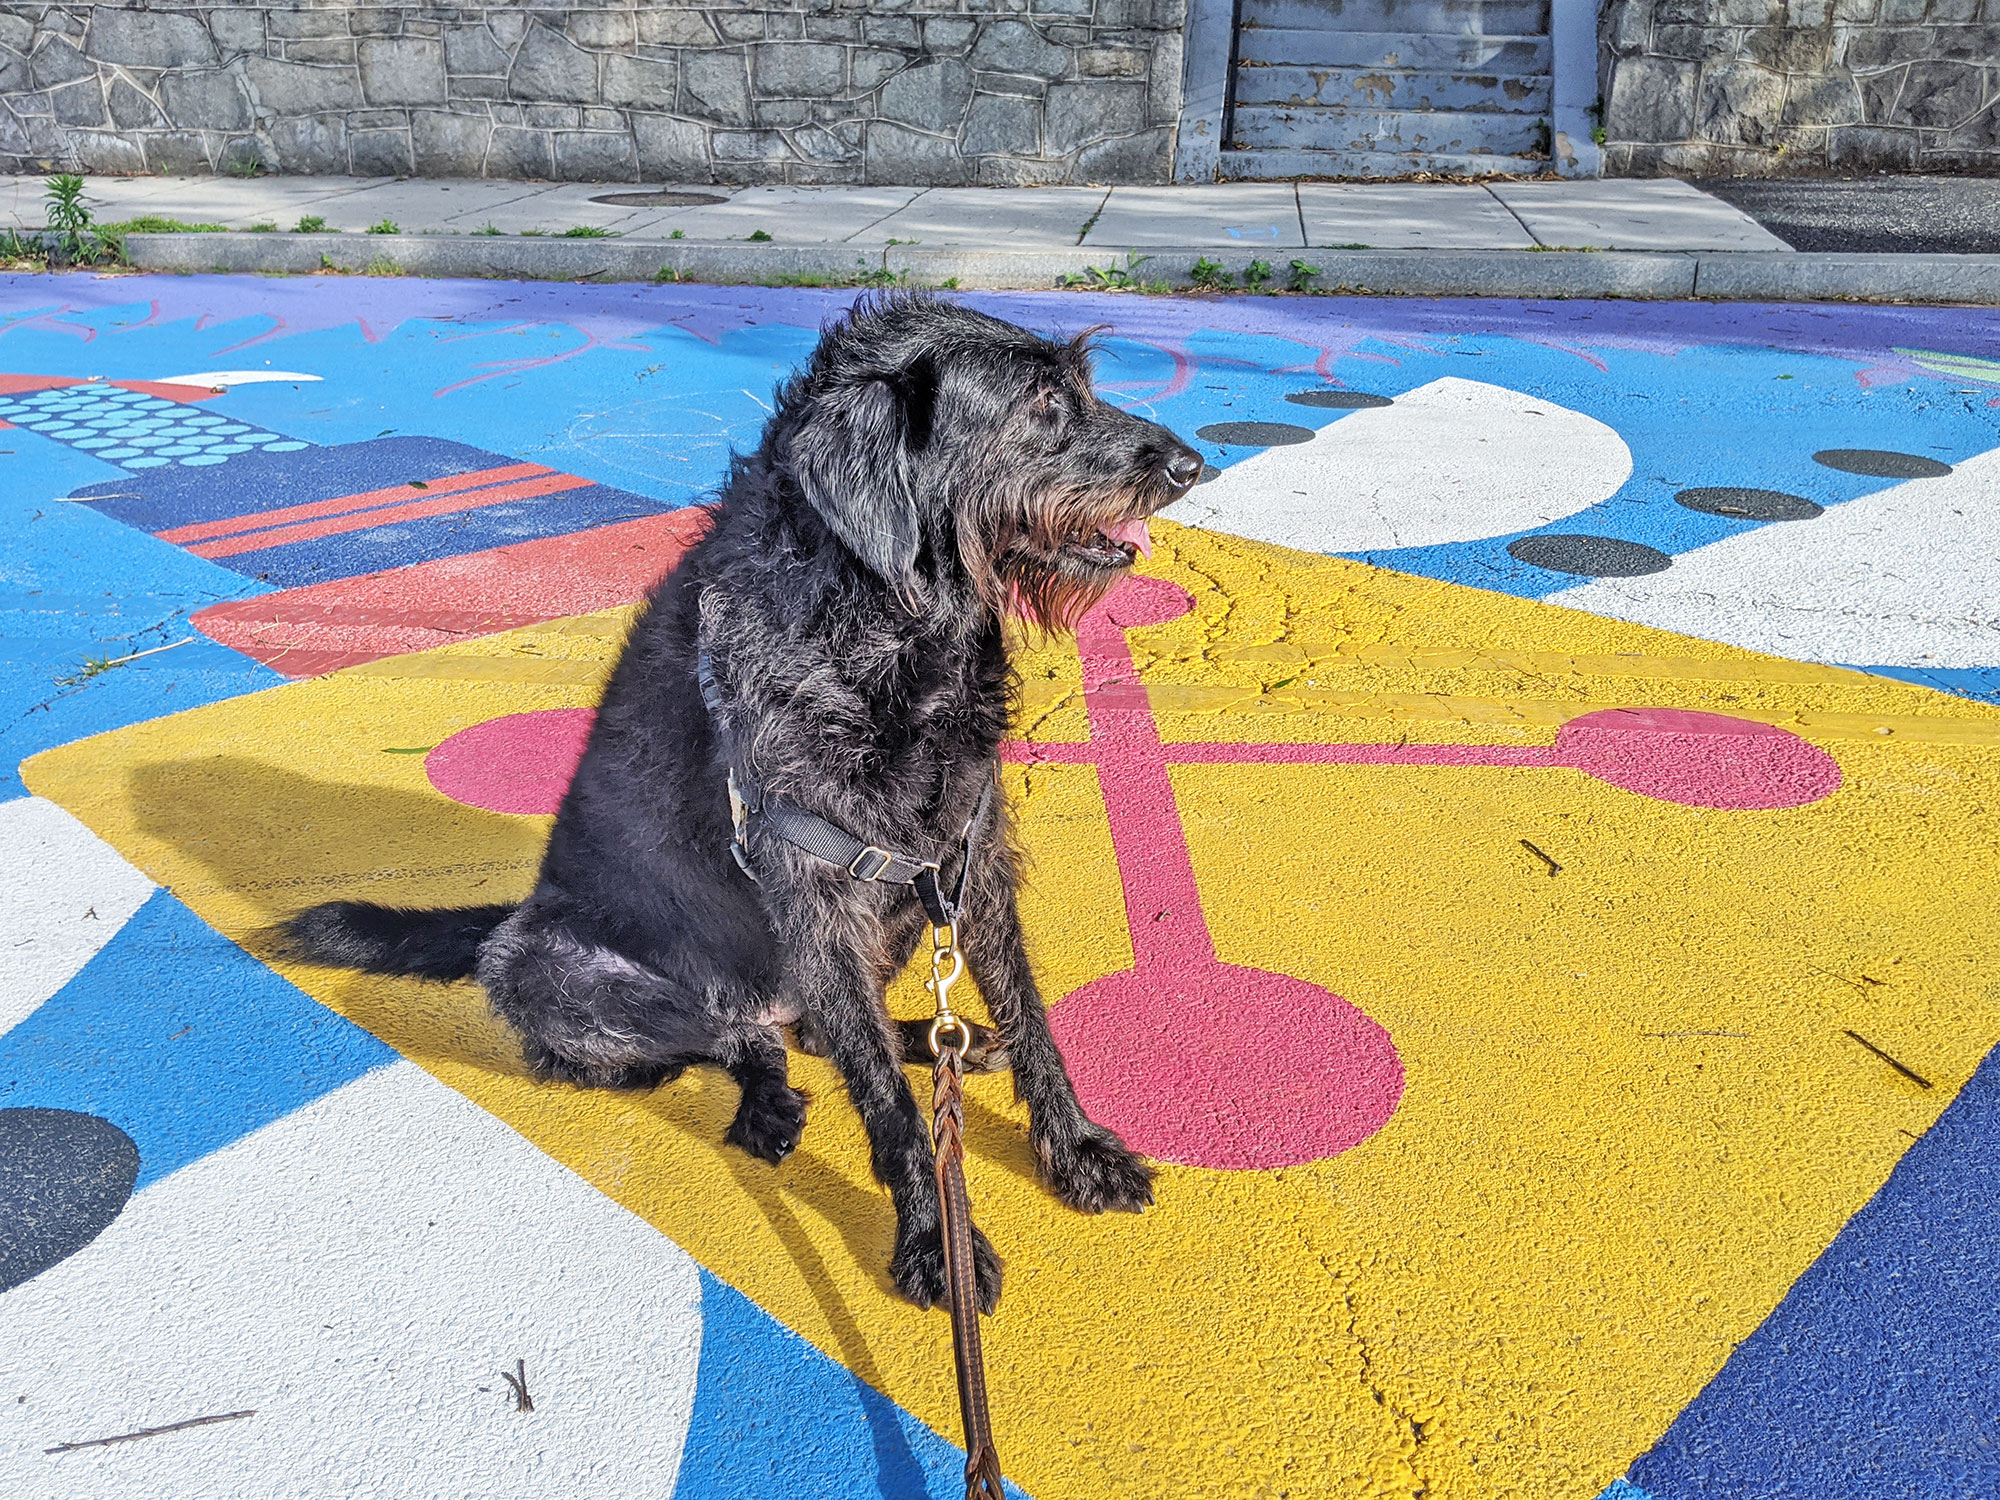 Ingrid the labradoodle with some street art in the Gallaudet / Trinidad neighborhood of Northeast D.C.